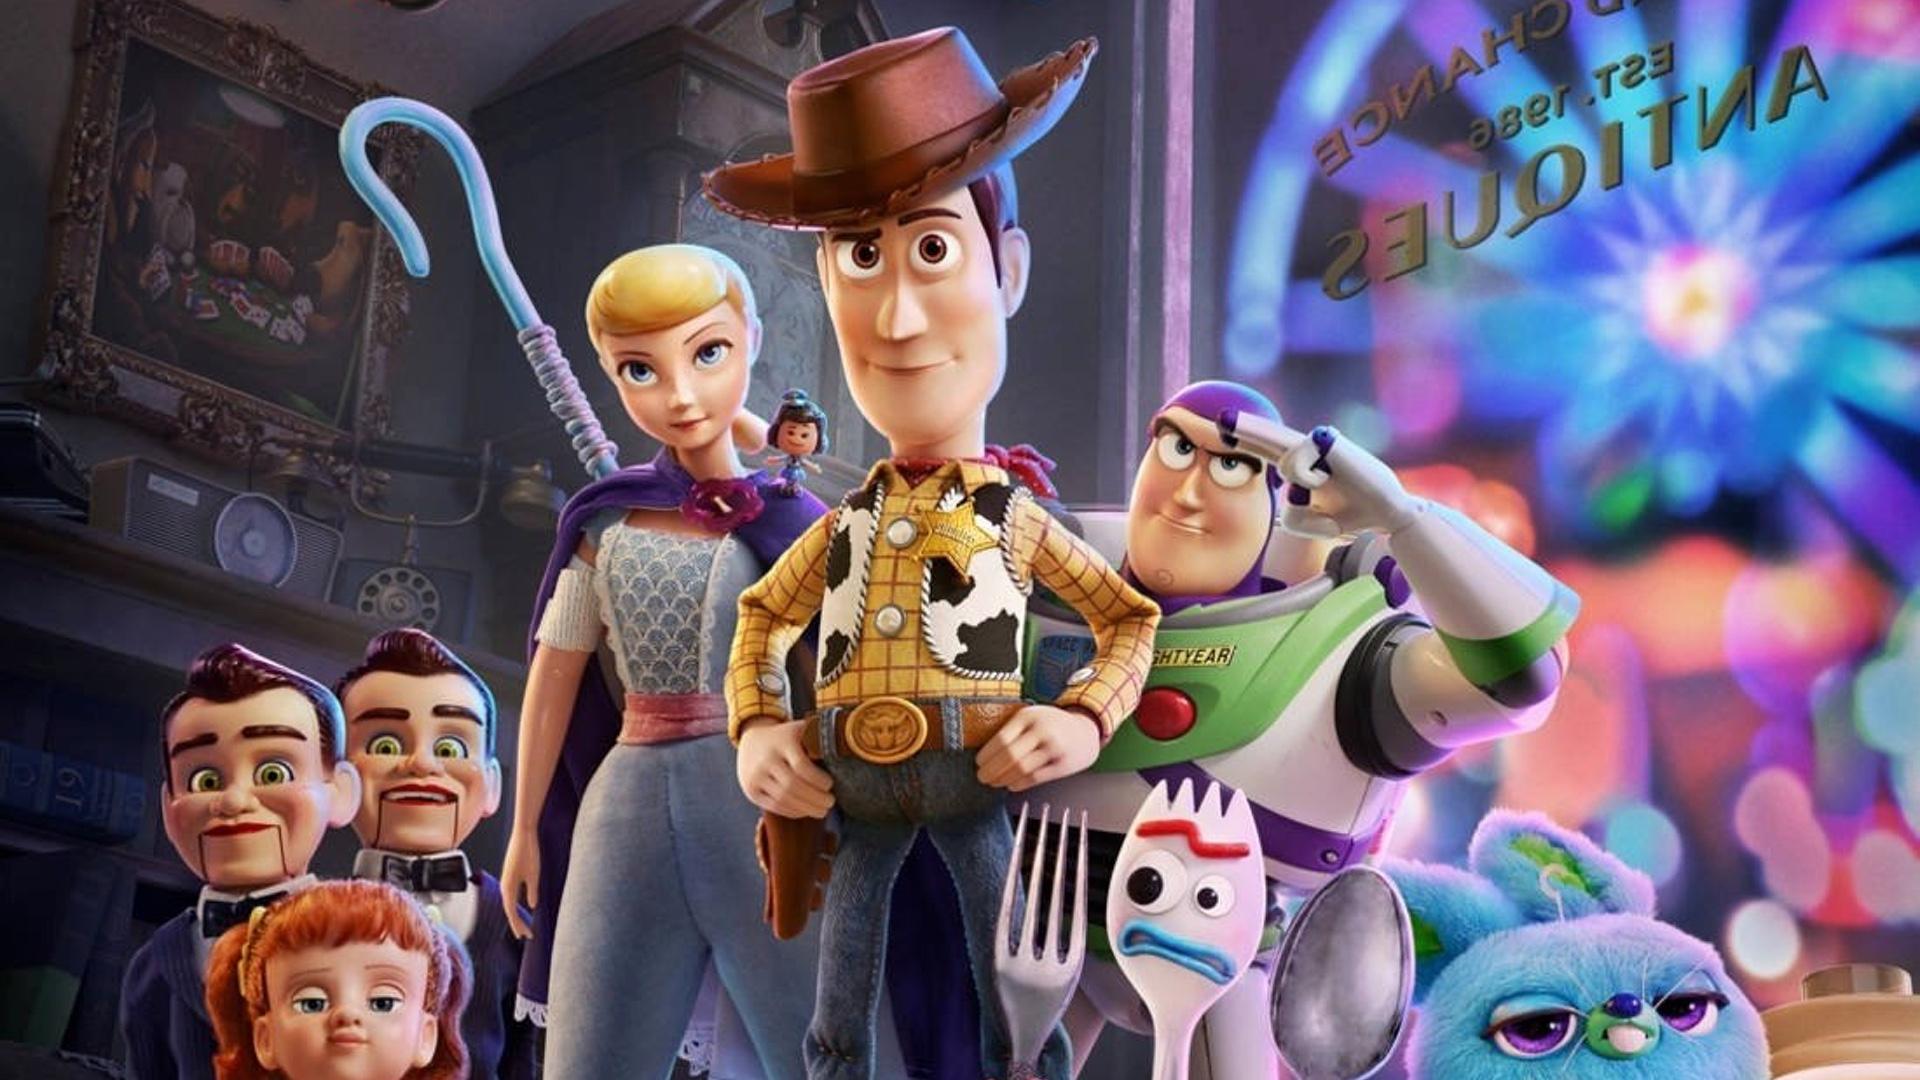 Wonderful Full and Poster for Pixar's TOY STORY 4